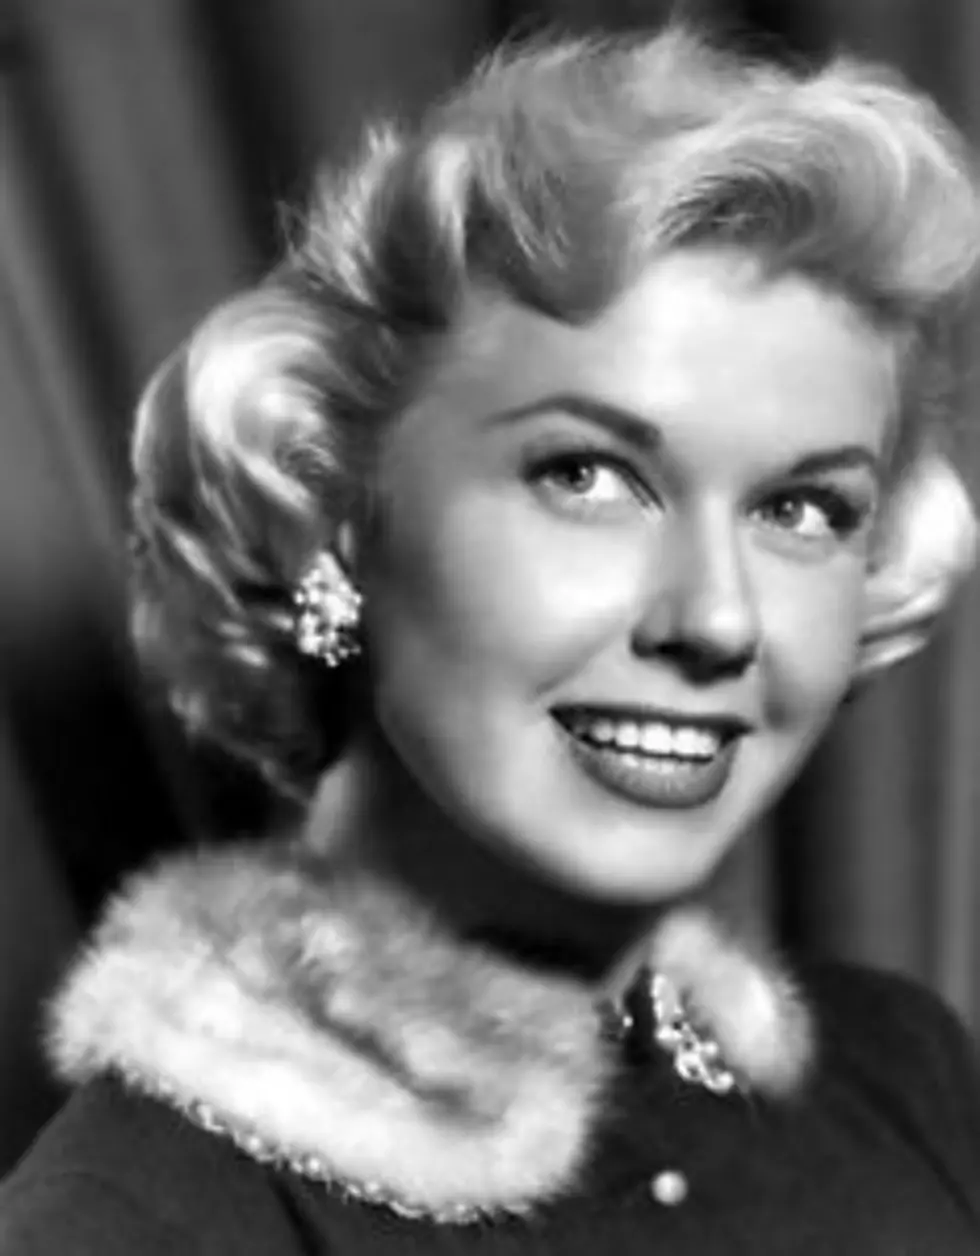 Show Business Legend Doris Day Turns 89 Today! (PHOTO; VIDEO)